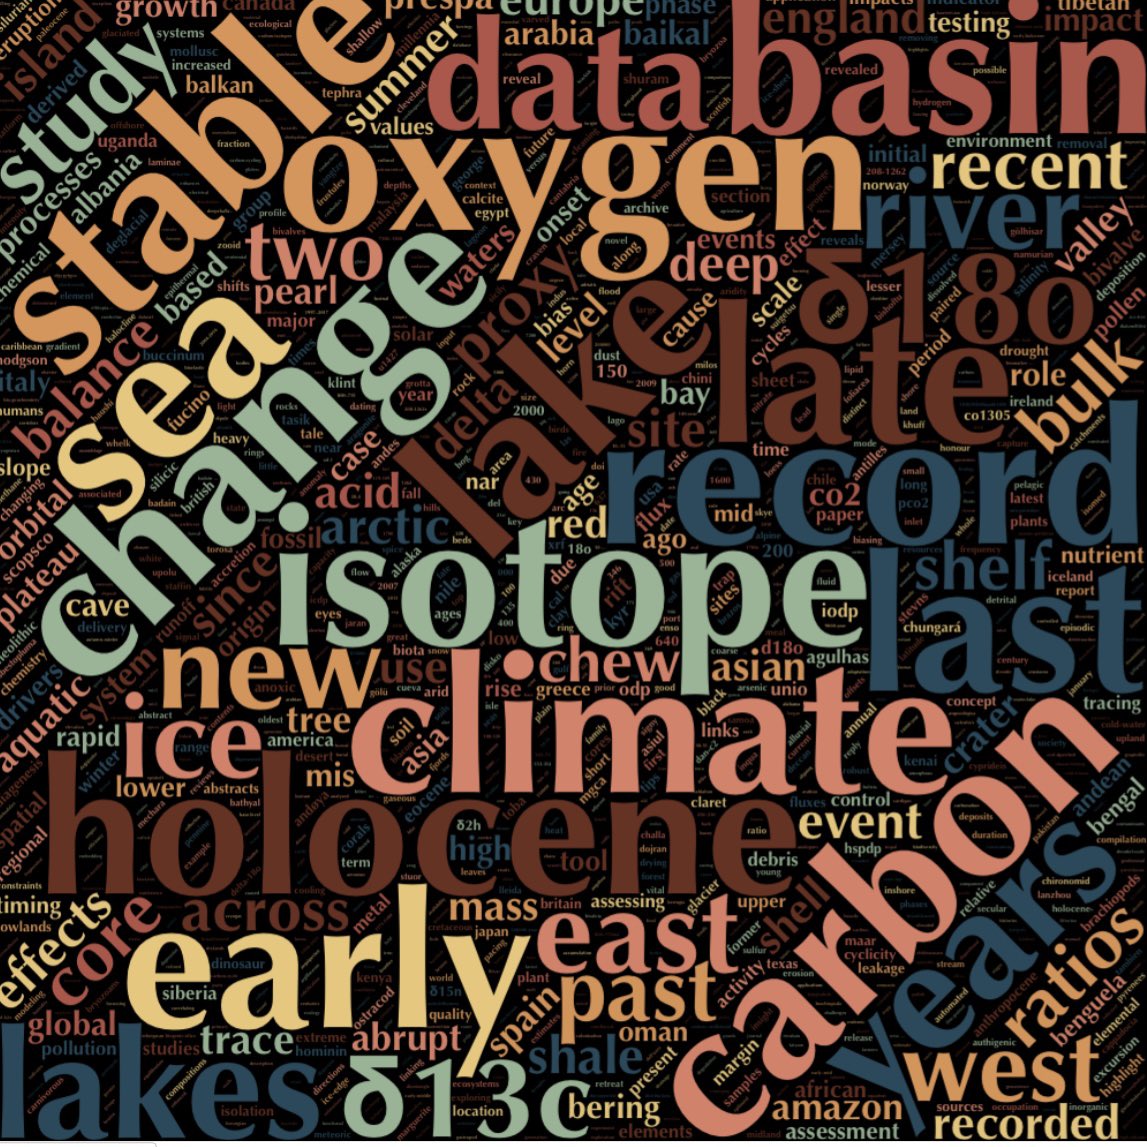 Word cloud from my papers, thanks to shiny.rcg.sfu.ca/u/rdmorin/scho…